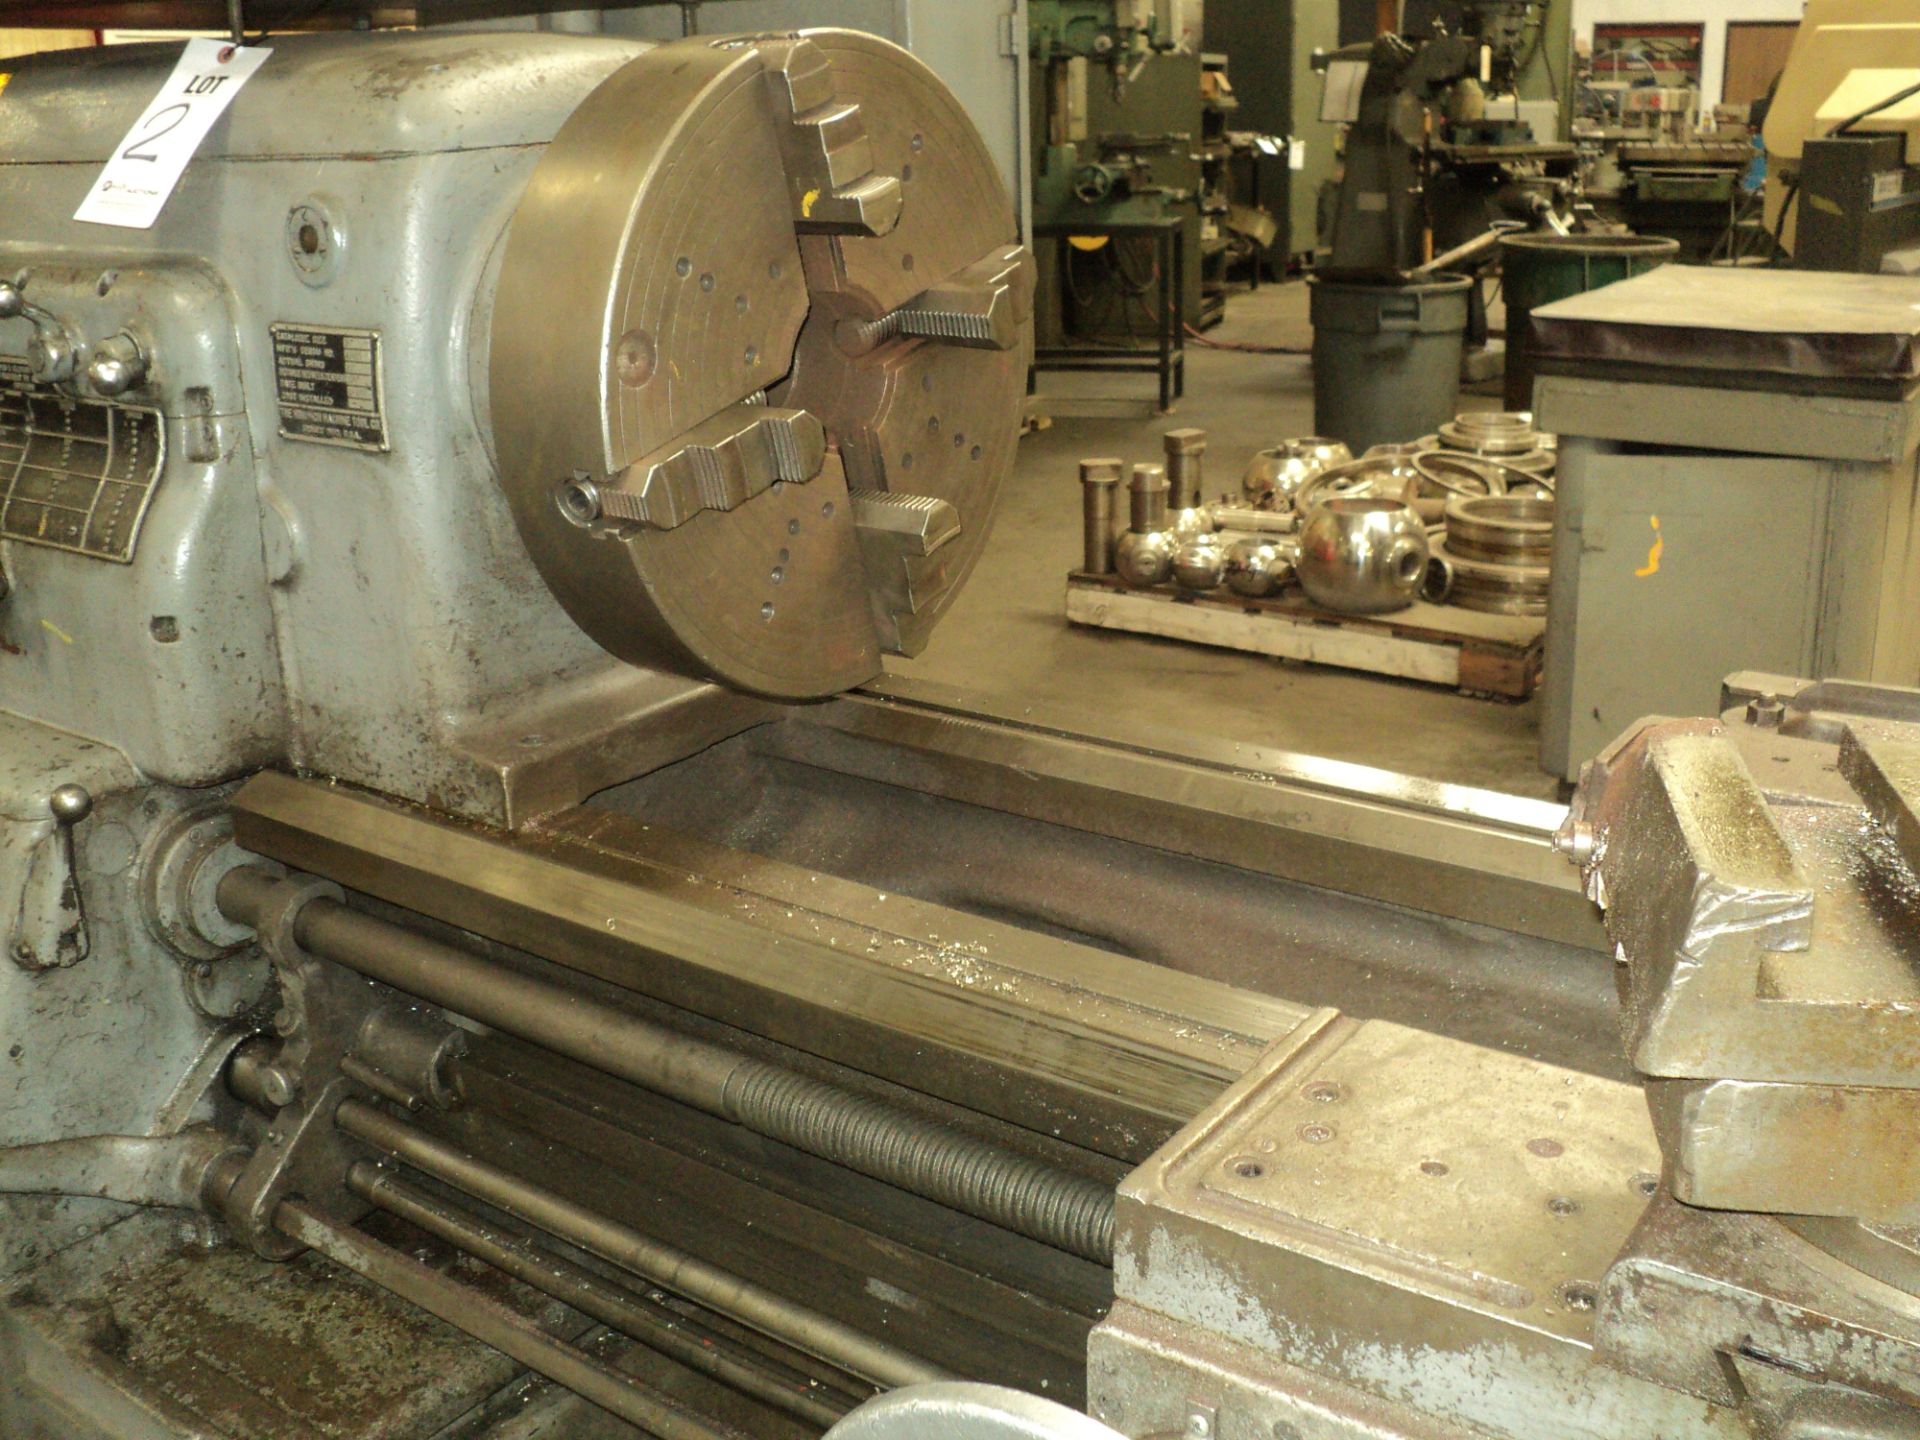 MONARCH ENGINE LATHE, 20" x 120" CCS, 12" 3 JAW CHUCK, TAILSTOCK, CROSS SLIDE, STEADY REST, TRACER - Image 4 of 5